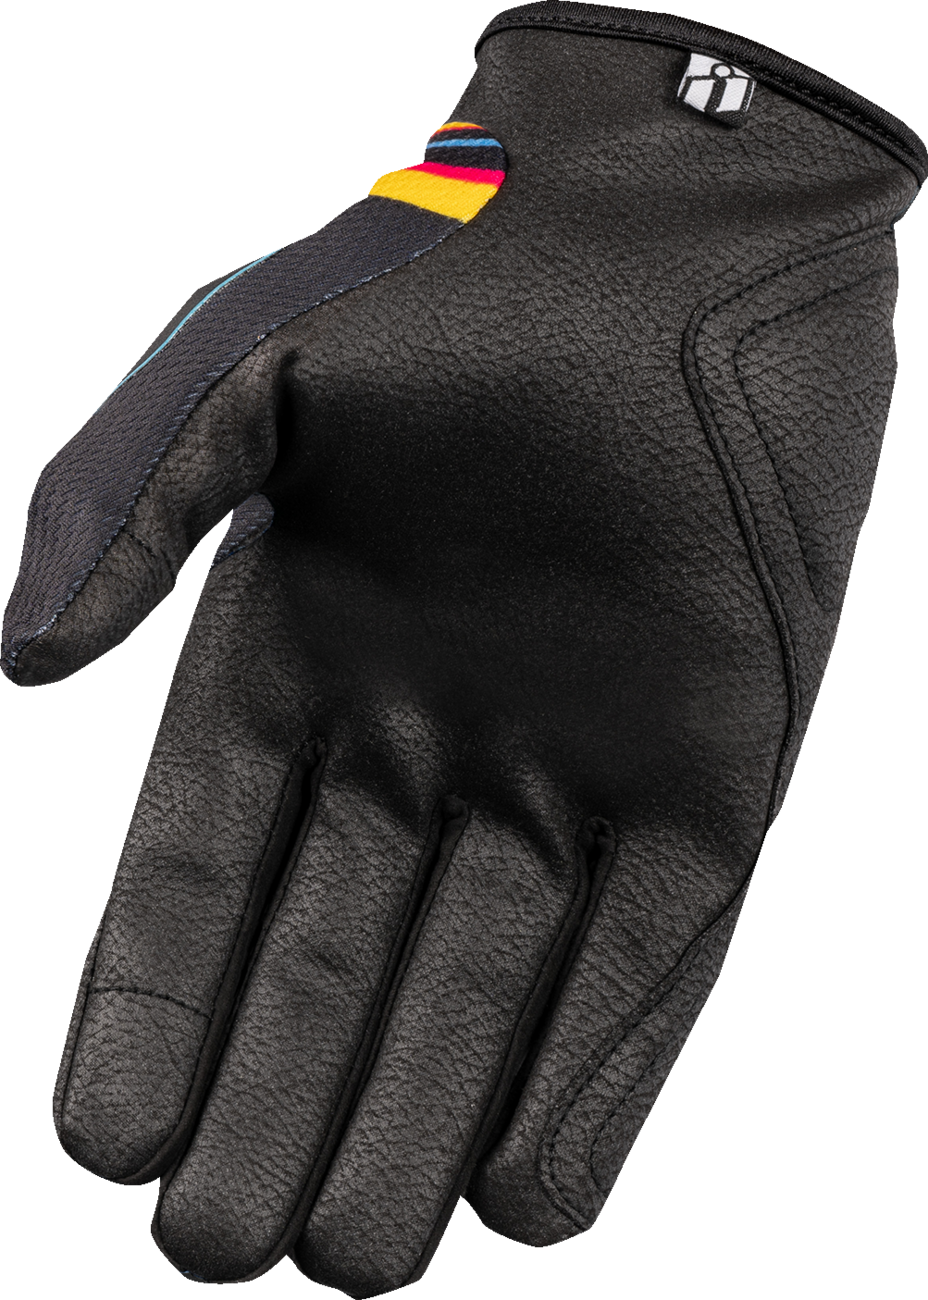 ICON Hooligan™ Lucky Lid Gloves - Black - Large 3301-4643